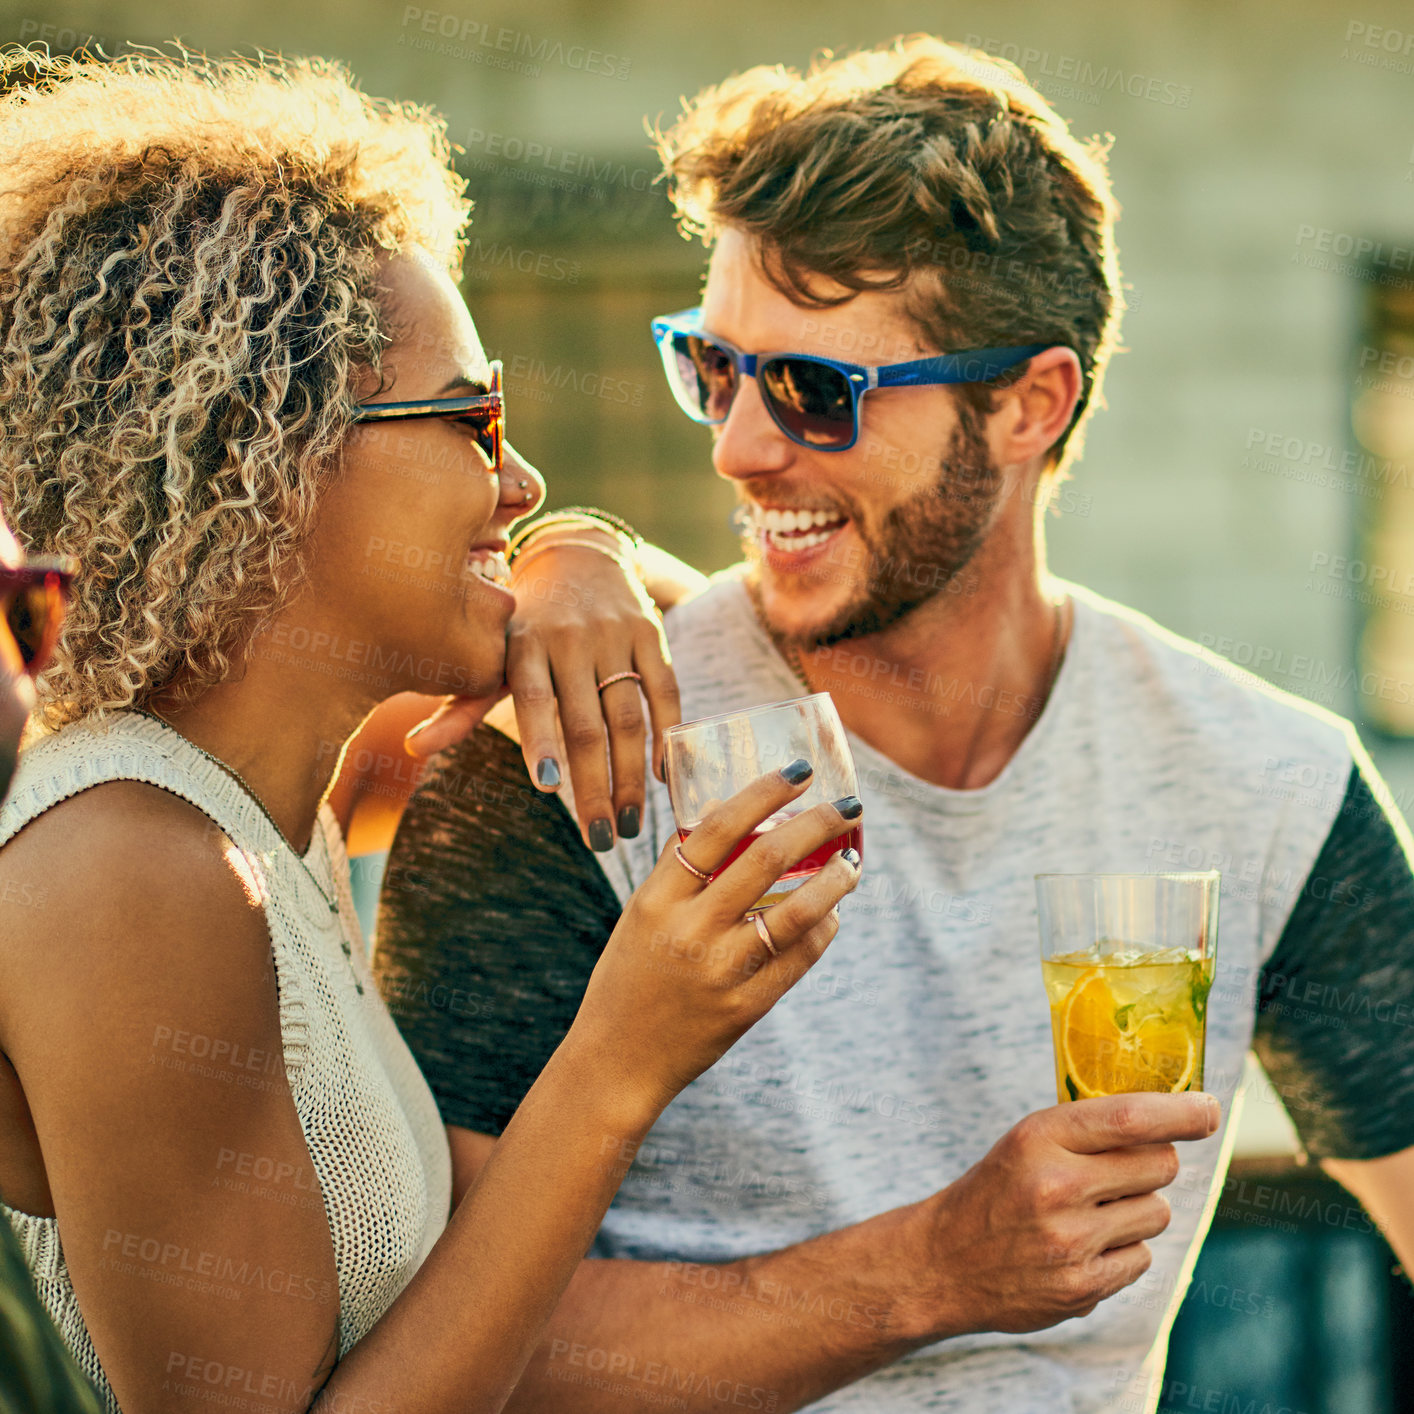 Buy stock photo Cropped shot of an attractive young couple having a drink and spending the day outside on a rooftop